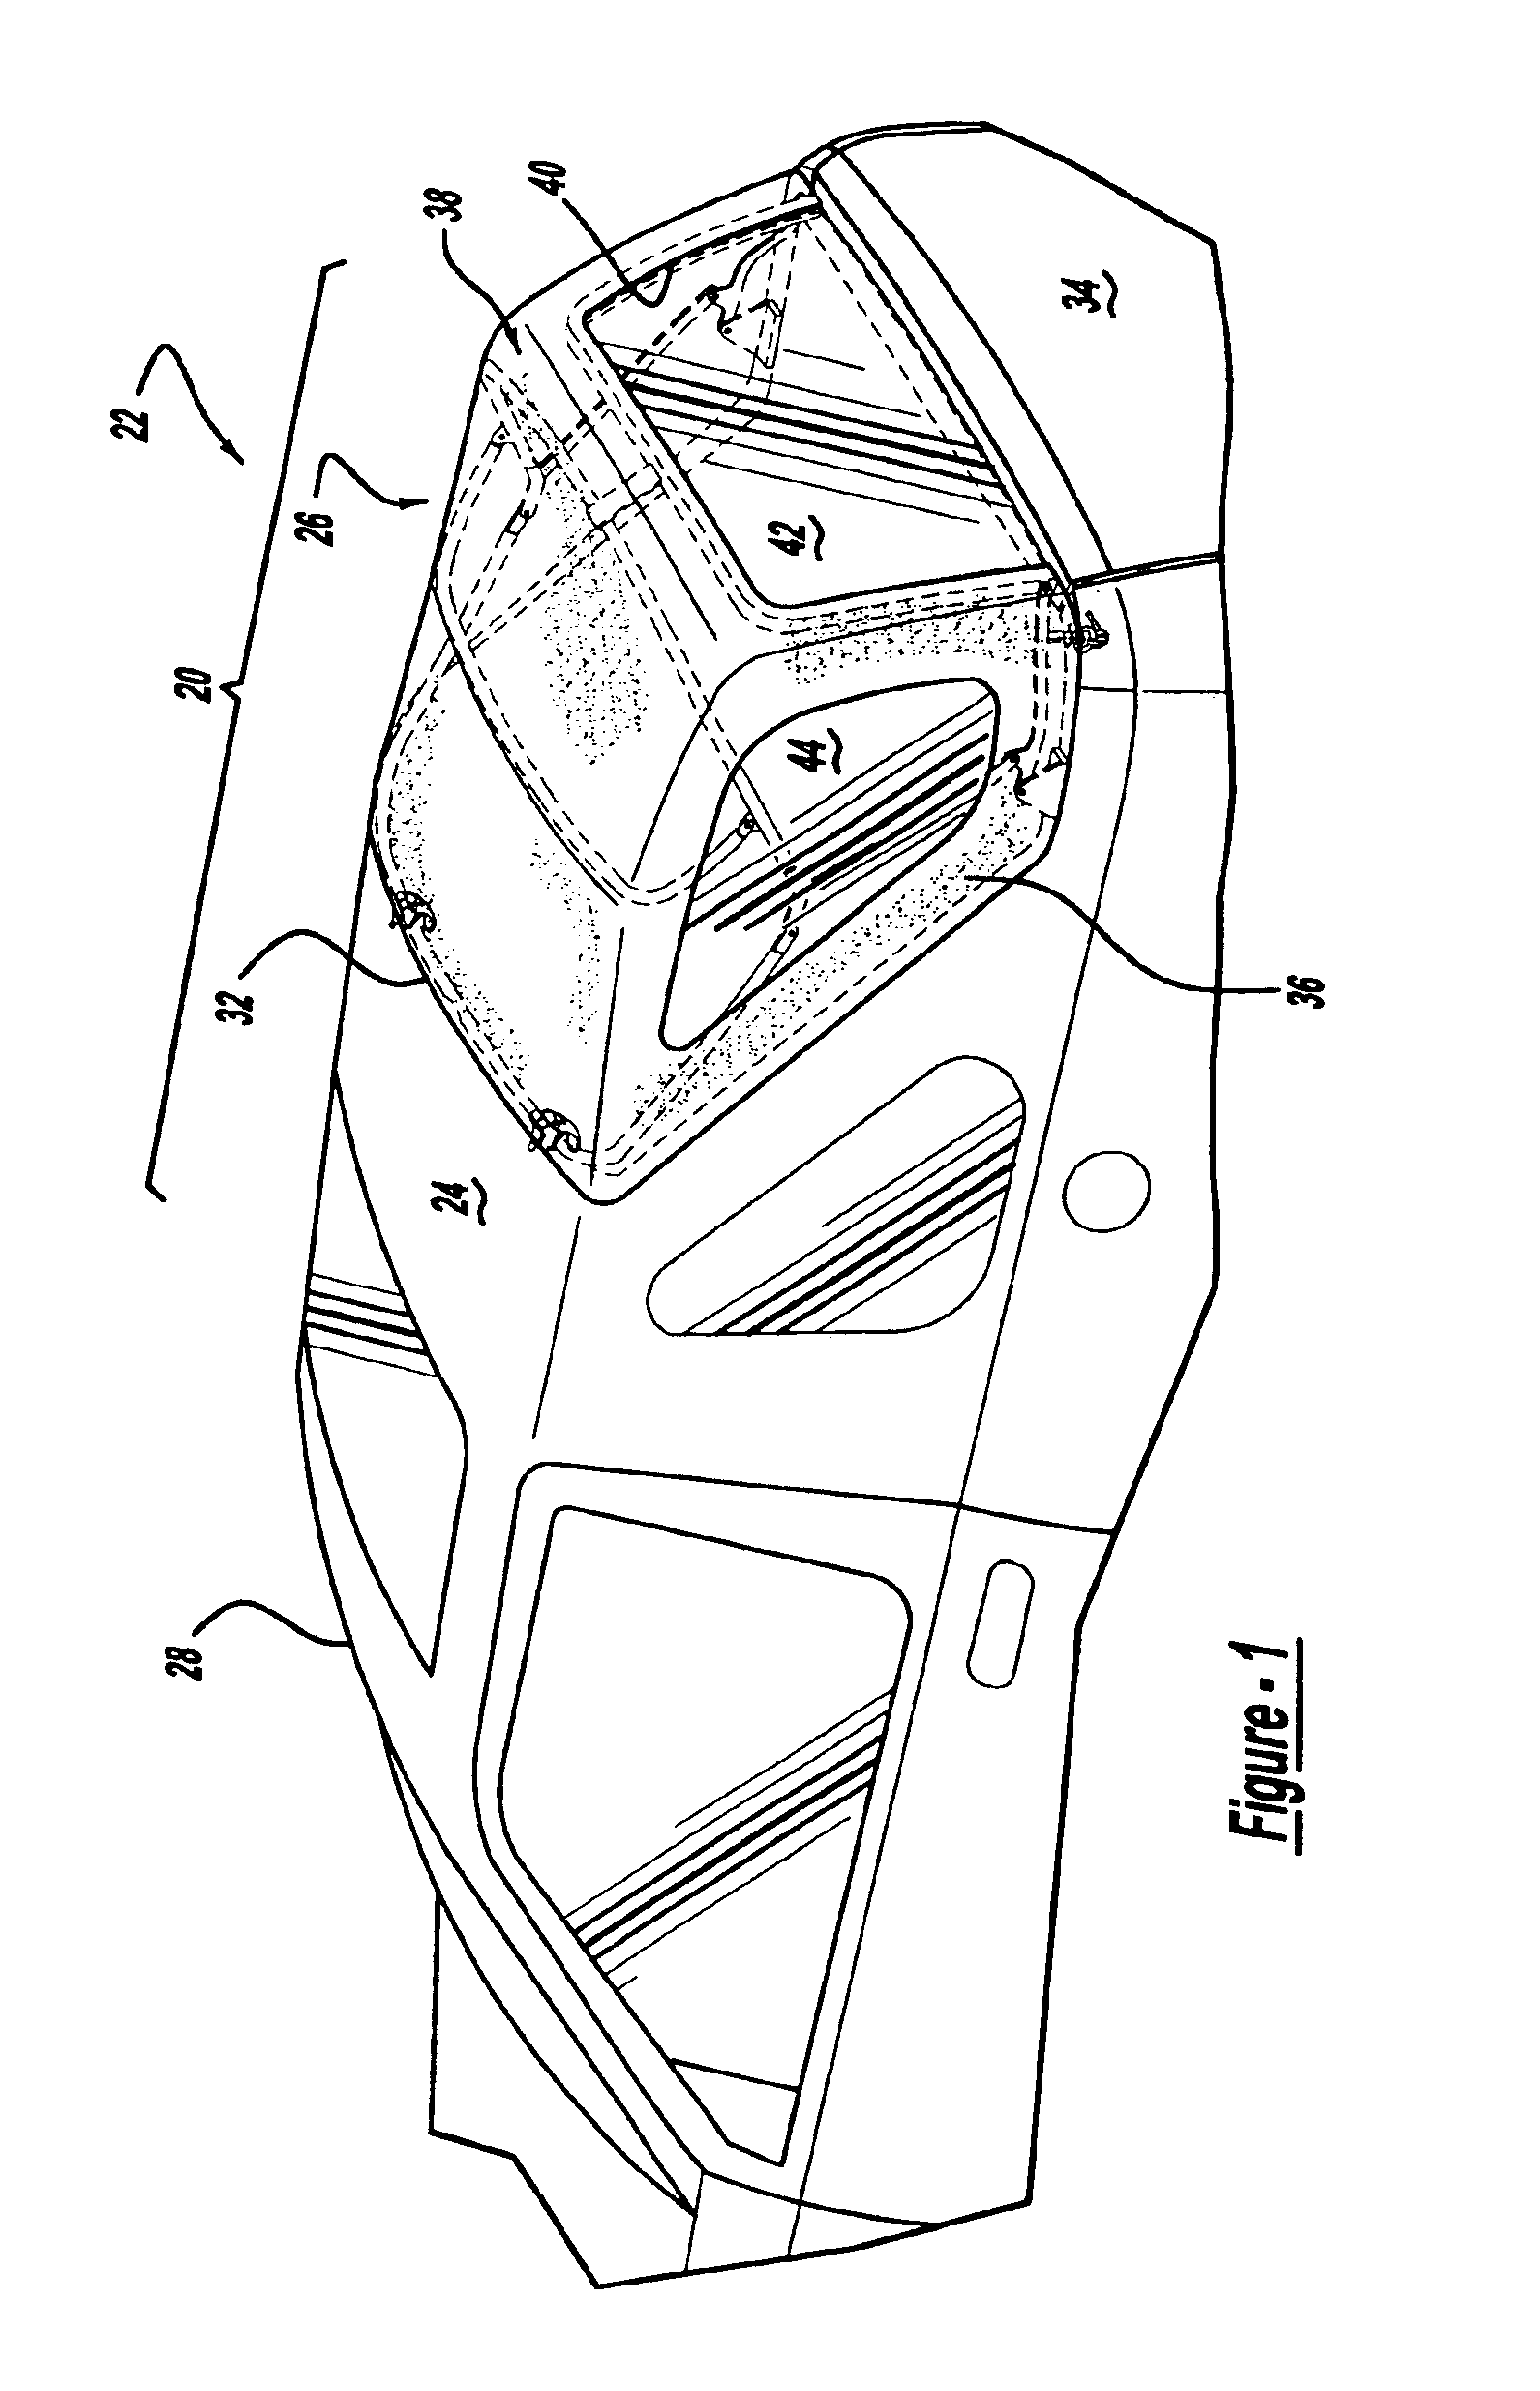 Automotive vehicle roof system having a detachable convertible roof